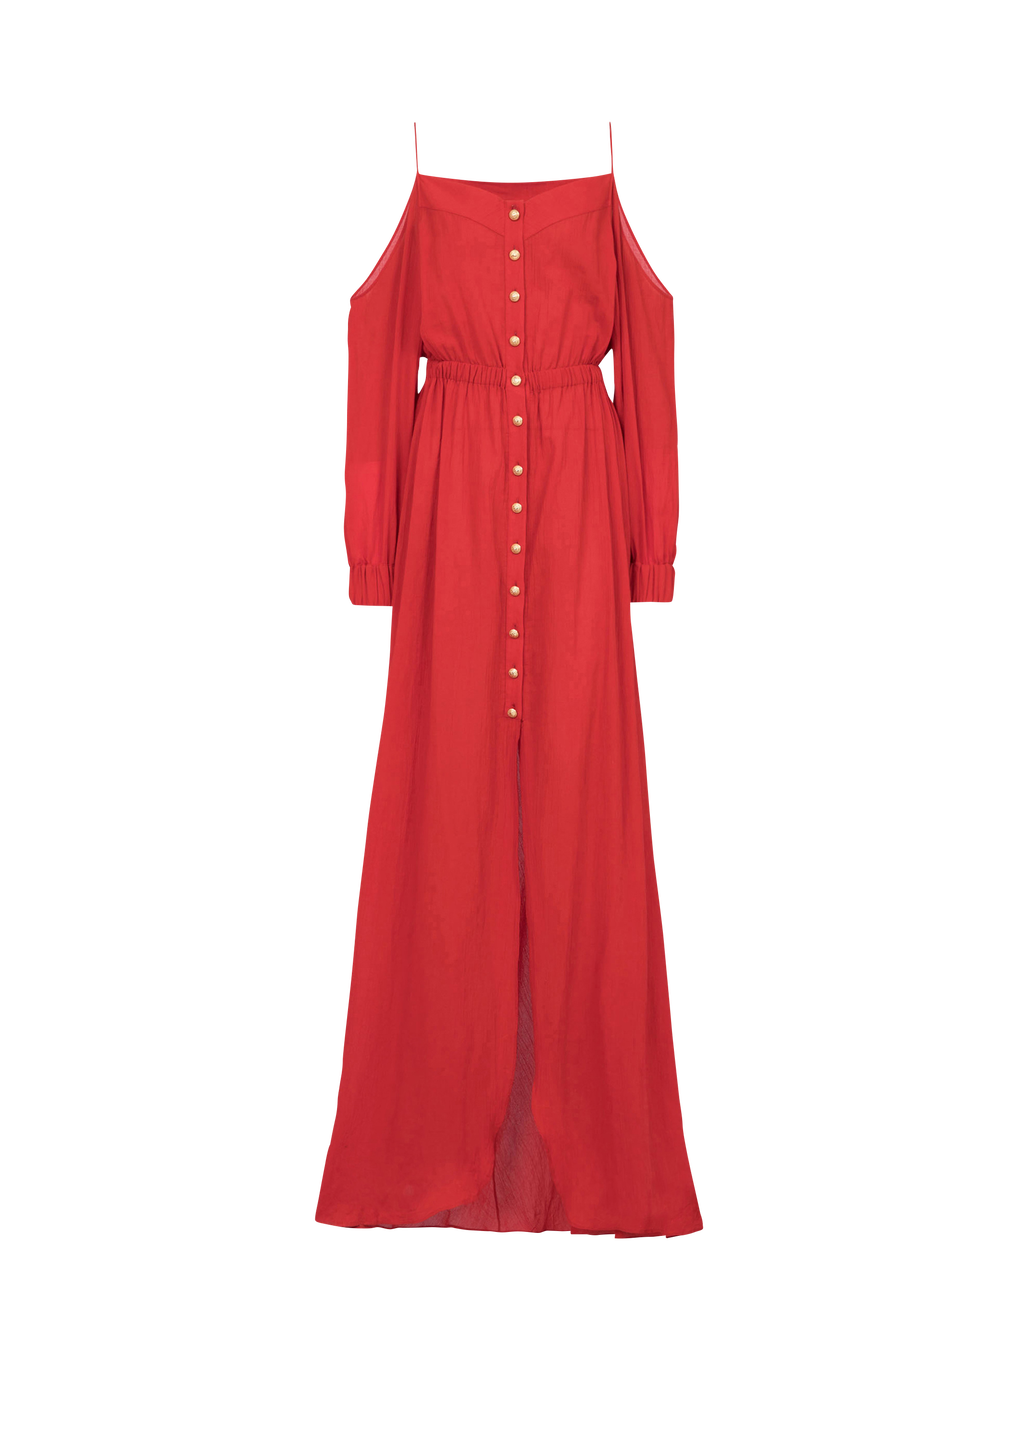 HIGH SUMMER CAPSULE - Long cotton dress, red, hi-res